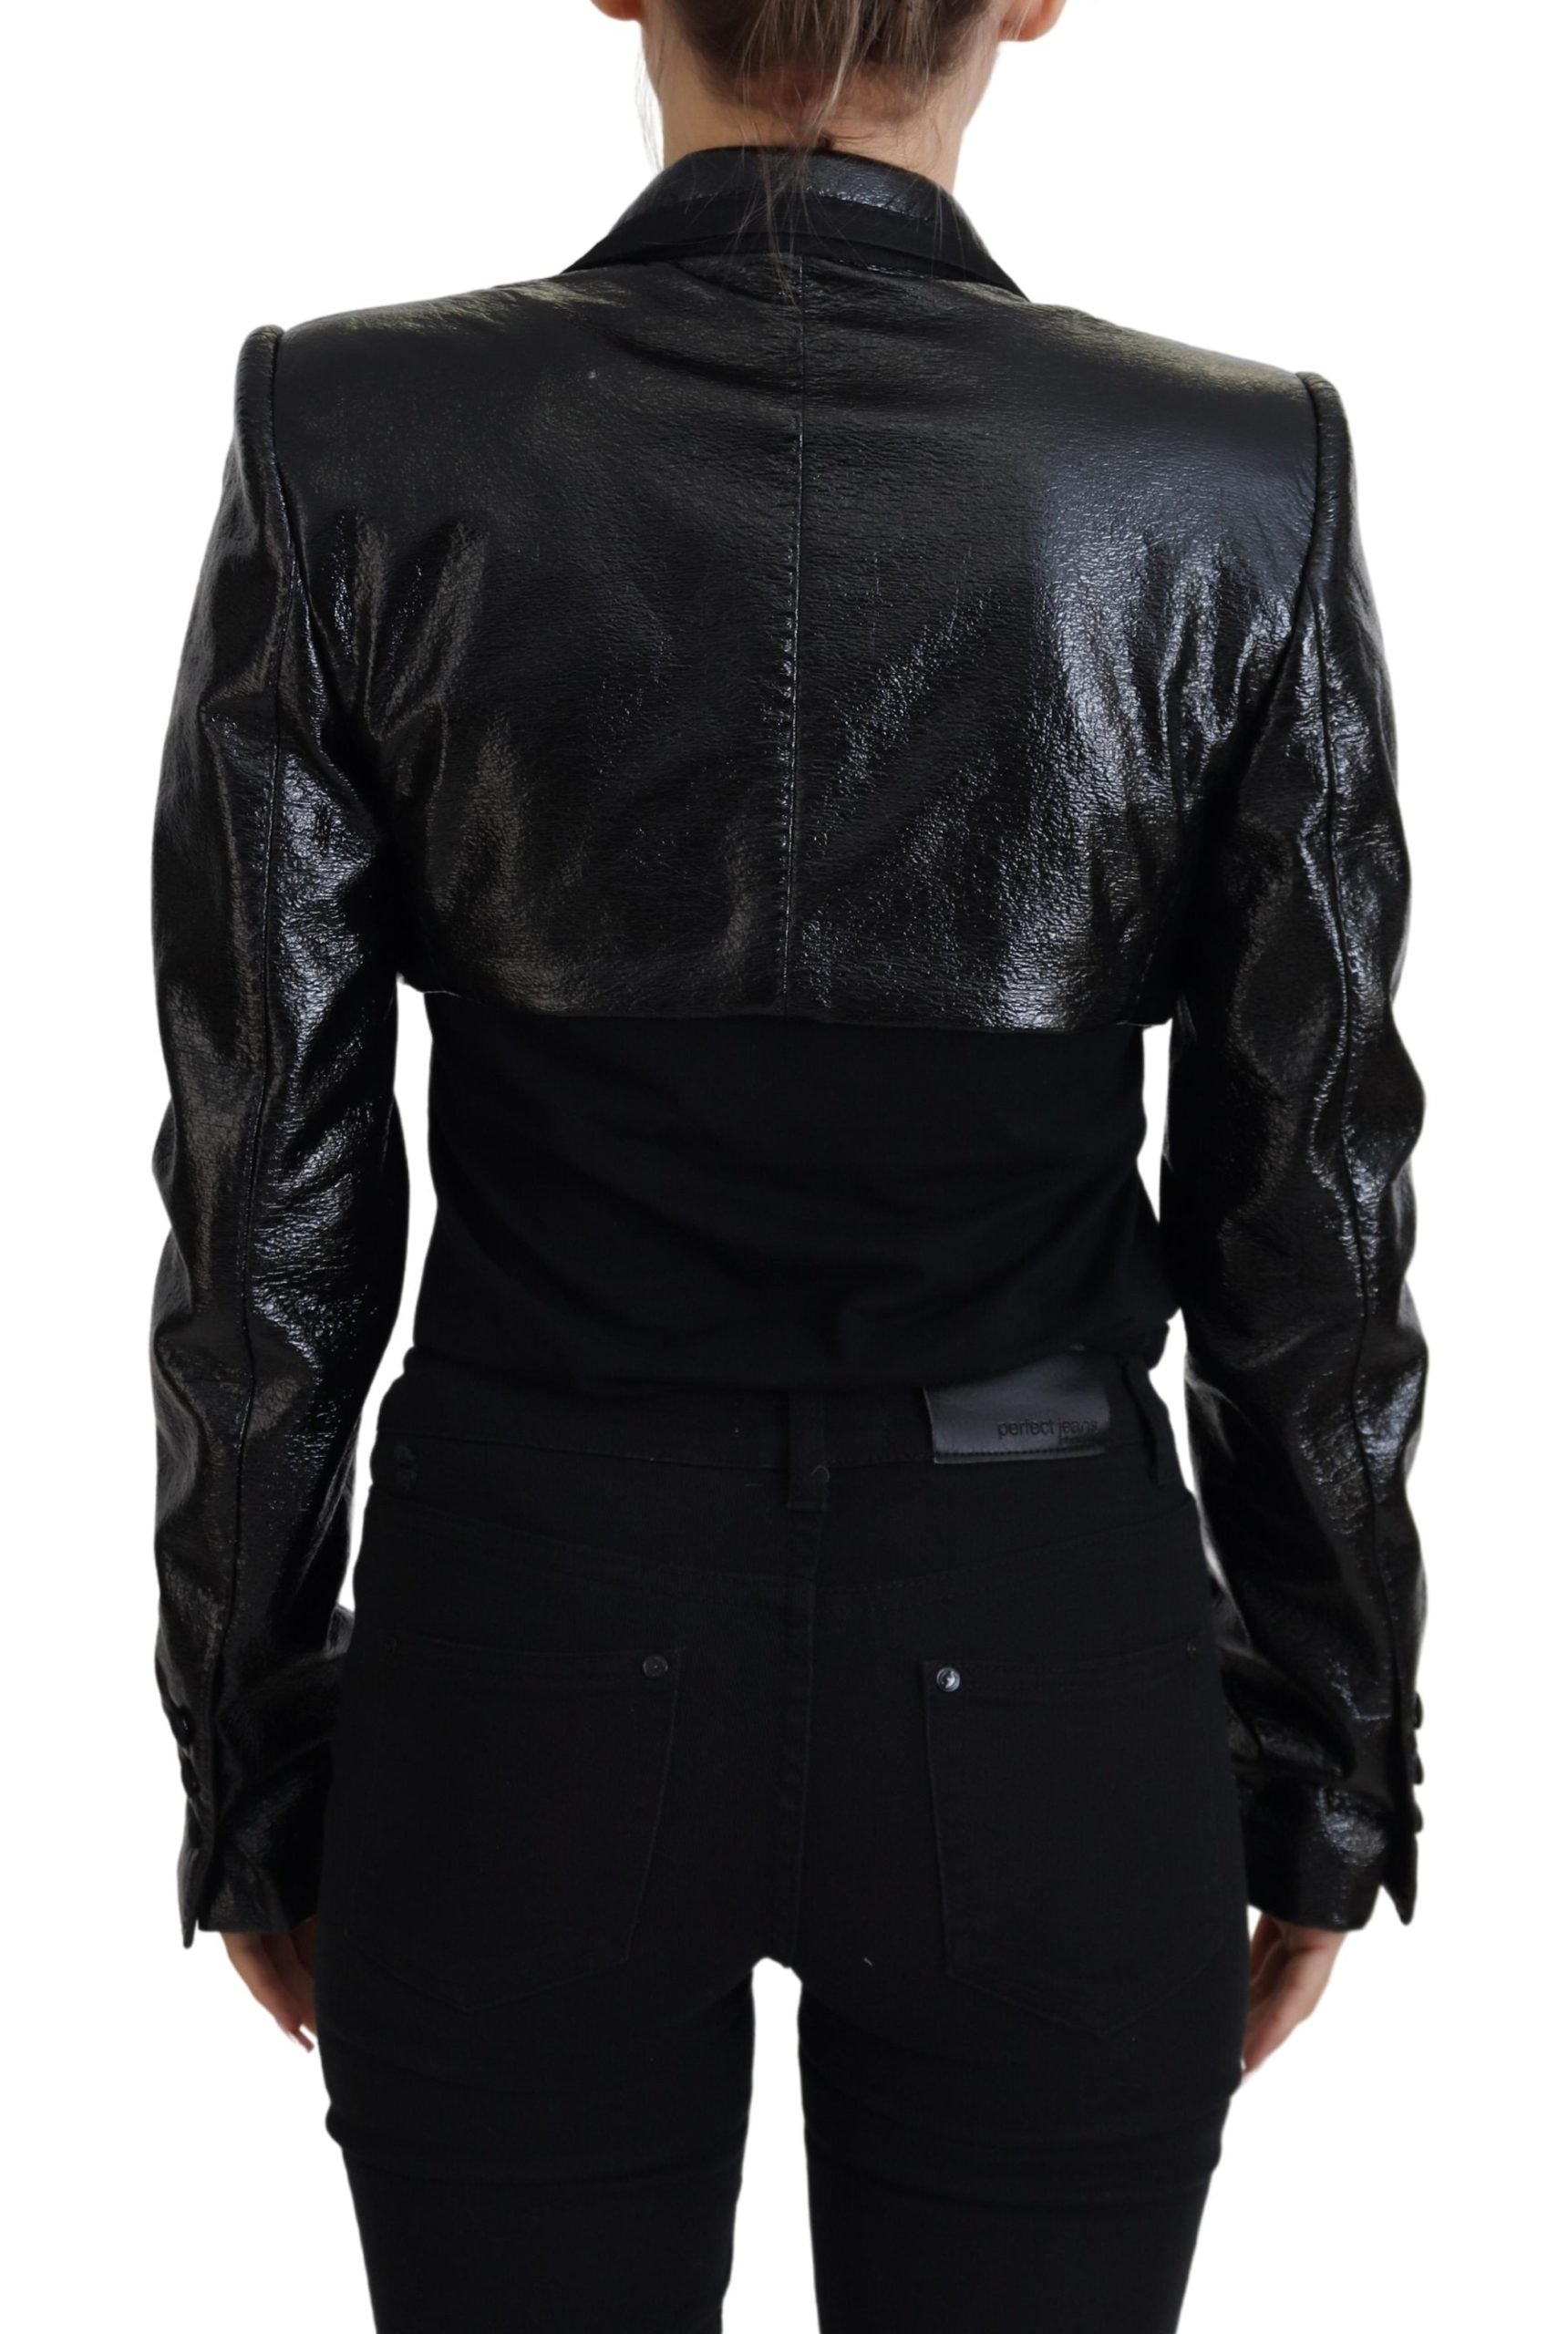 Dolce & Gabbana Black Long Sleeves Crop Blazer Cotton Jacket - Designed by Dolce & Gabbana Available to Buy at a Discounted Price on Moon Behind The Hill Online Designer Discount Store